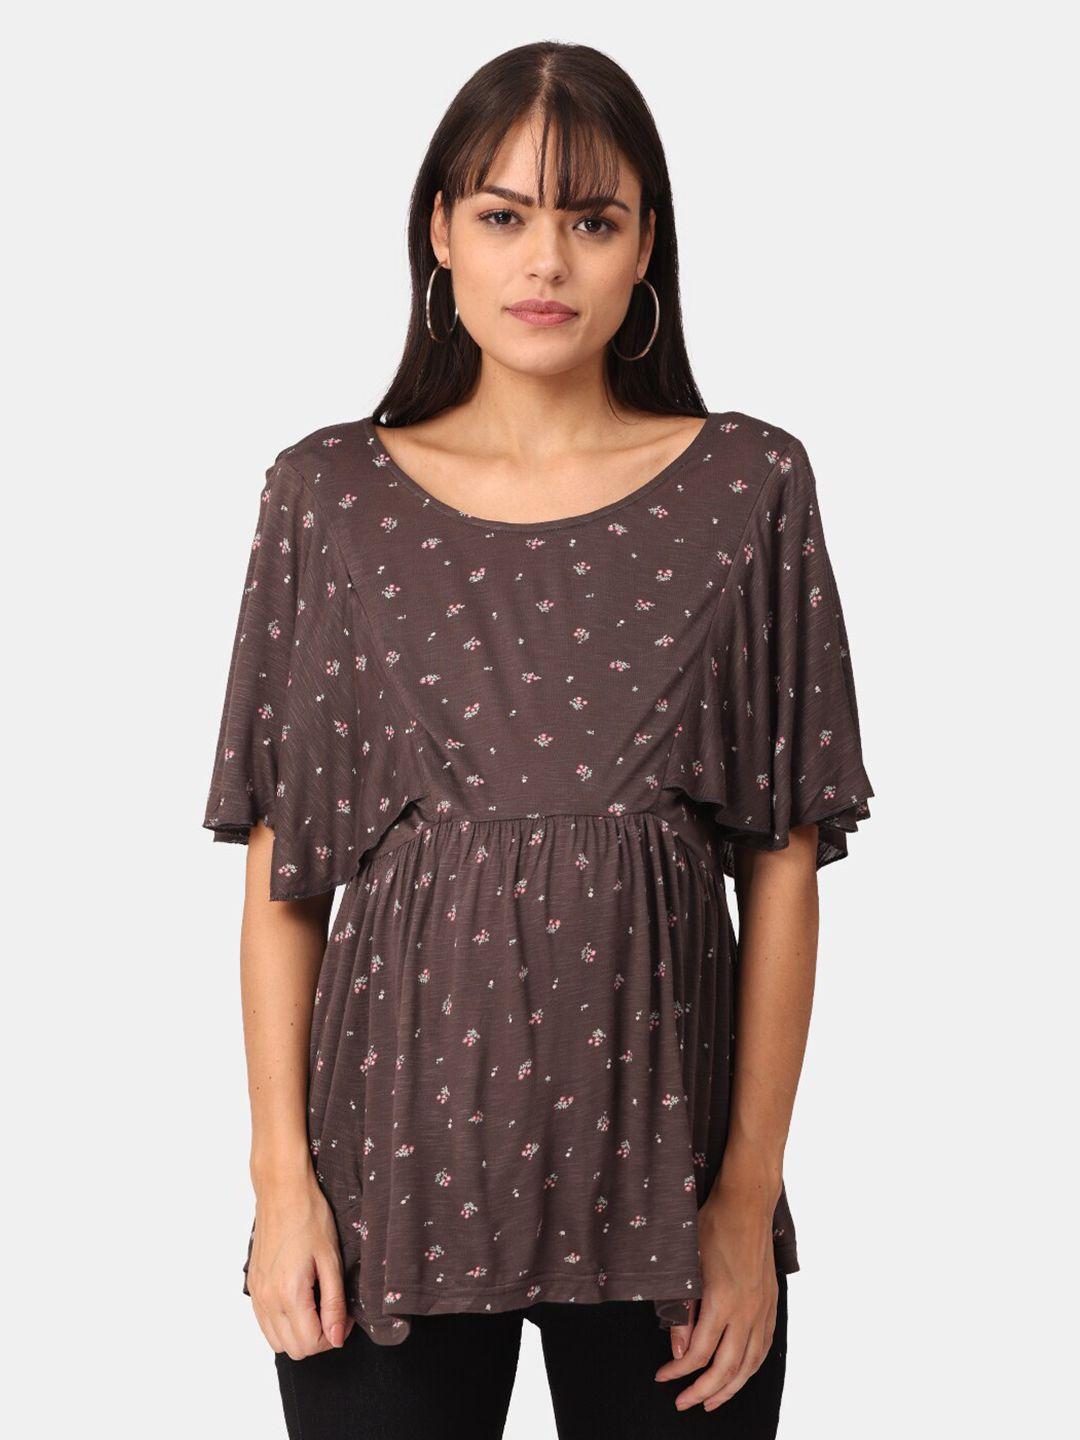 the mom store brown embellished extended sleeves maternity cinched waist top